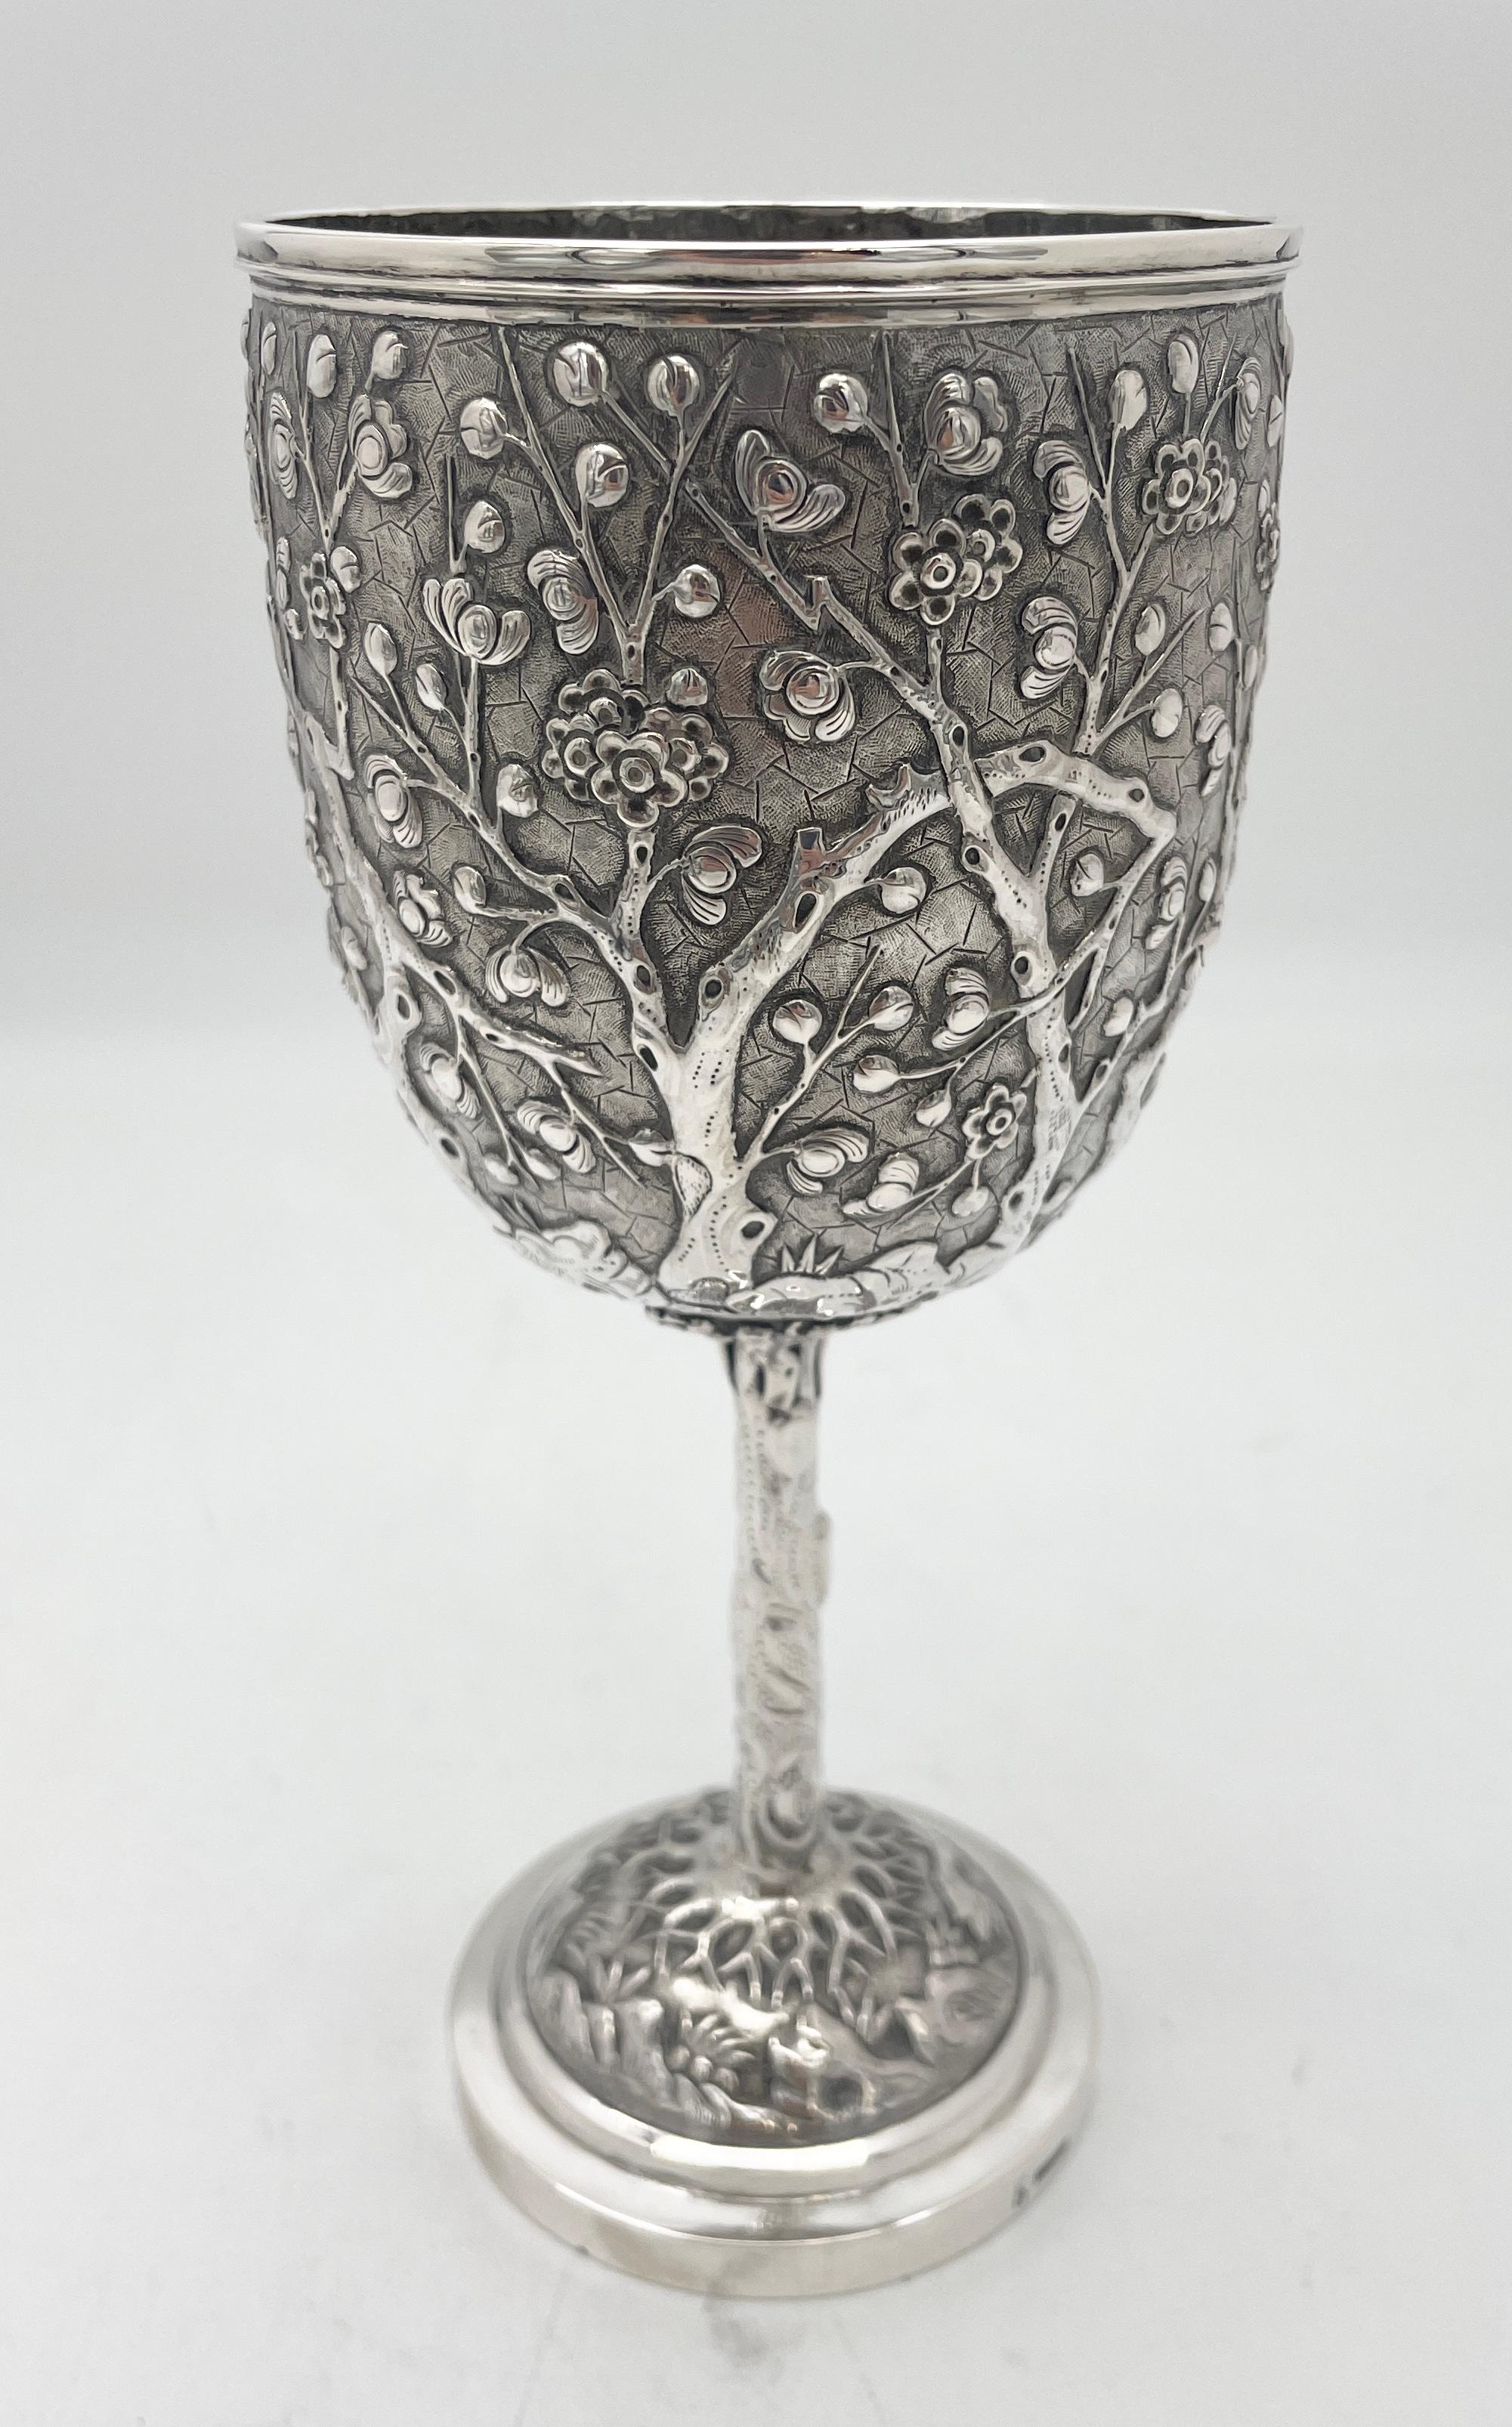 A Chinese export silver goblet with prunus decoration on a matte background, and the base and stem formed as prunus tree branch root. The body has a single round cartouche engraved 